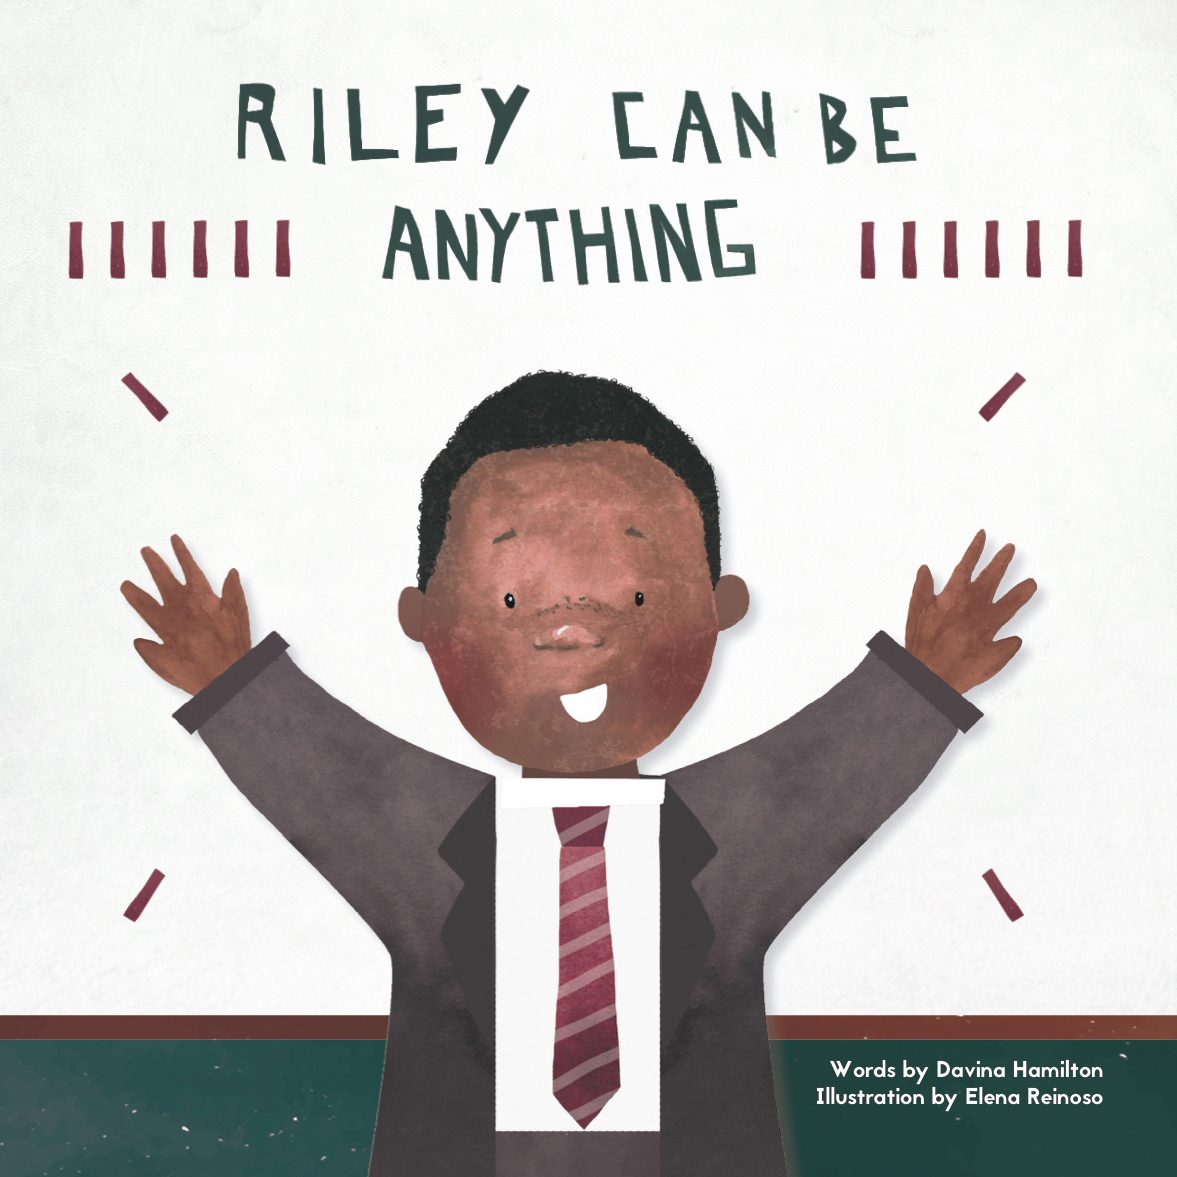 Riley can be anything: A children’s book with an essential message